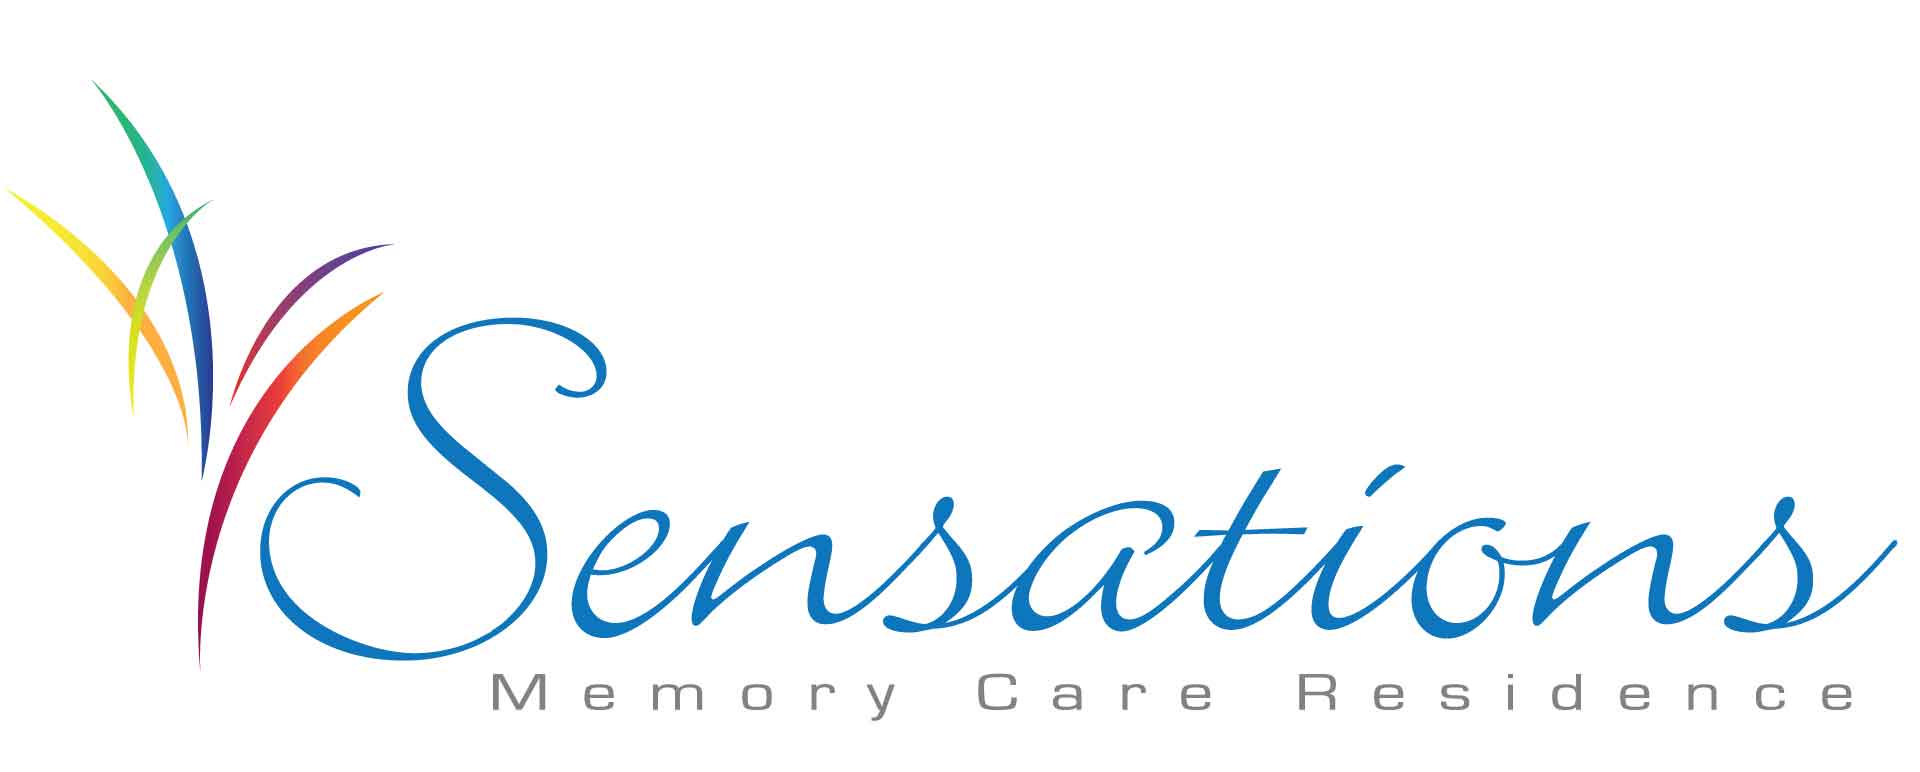 Contact Us Sensations Memory Care Residence